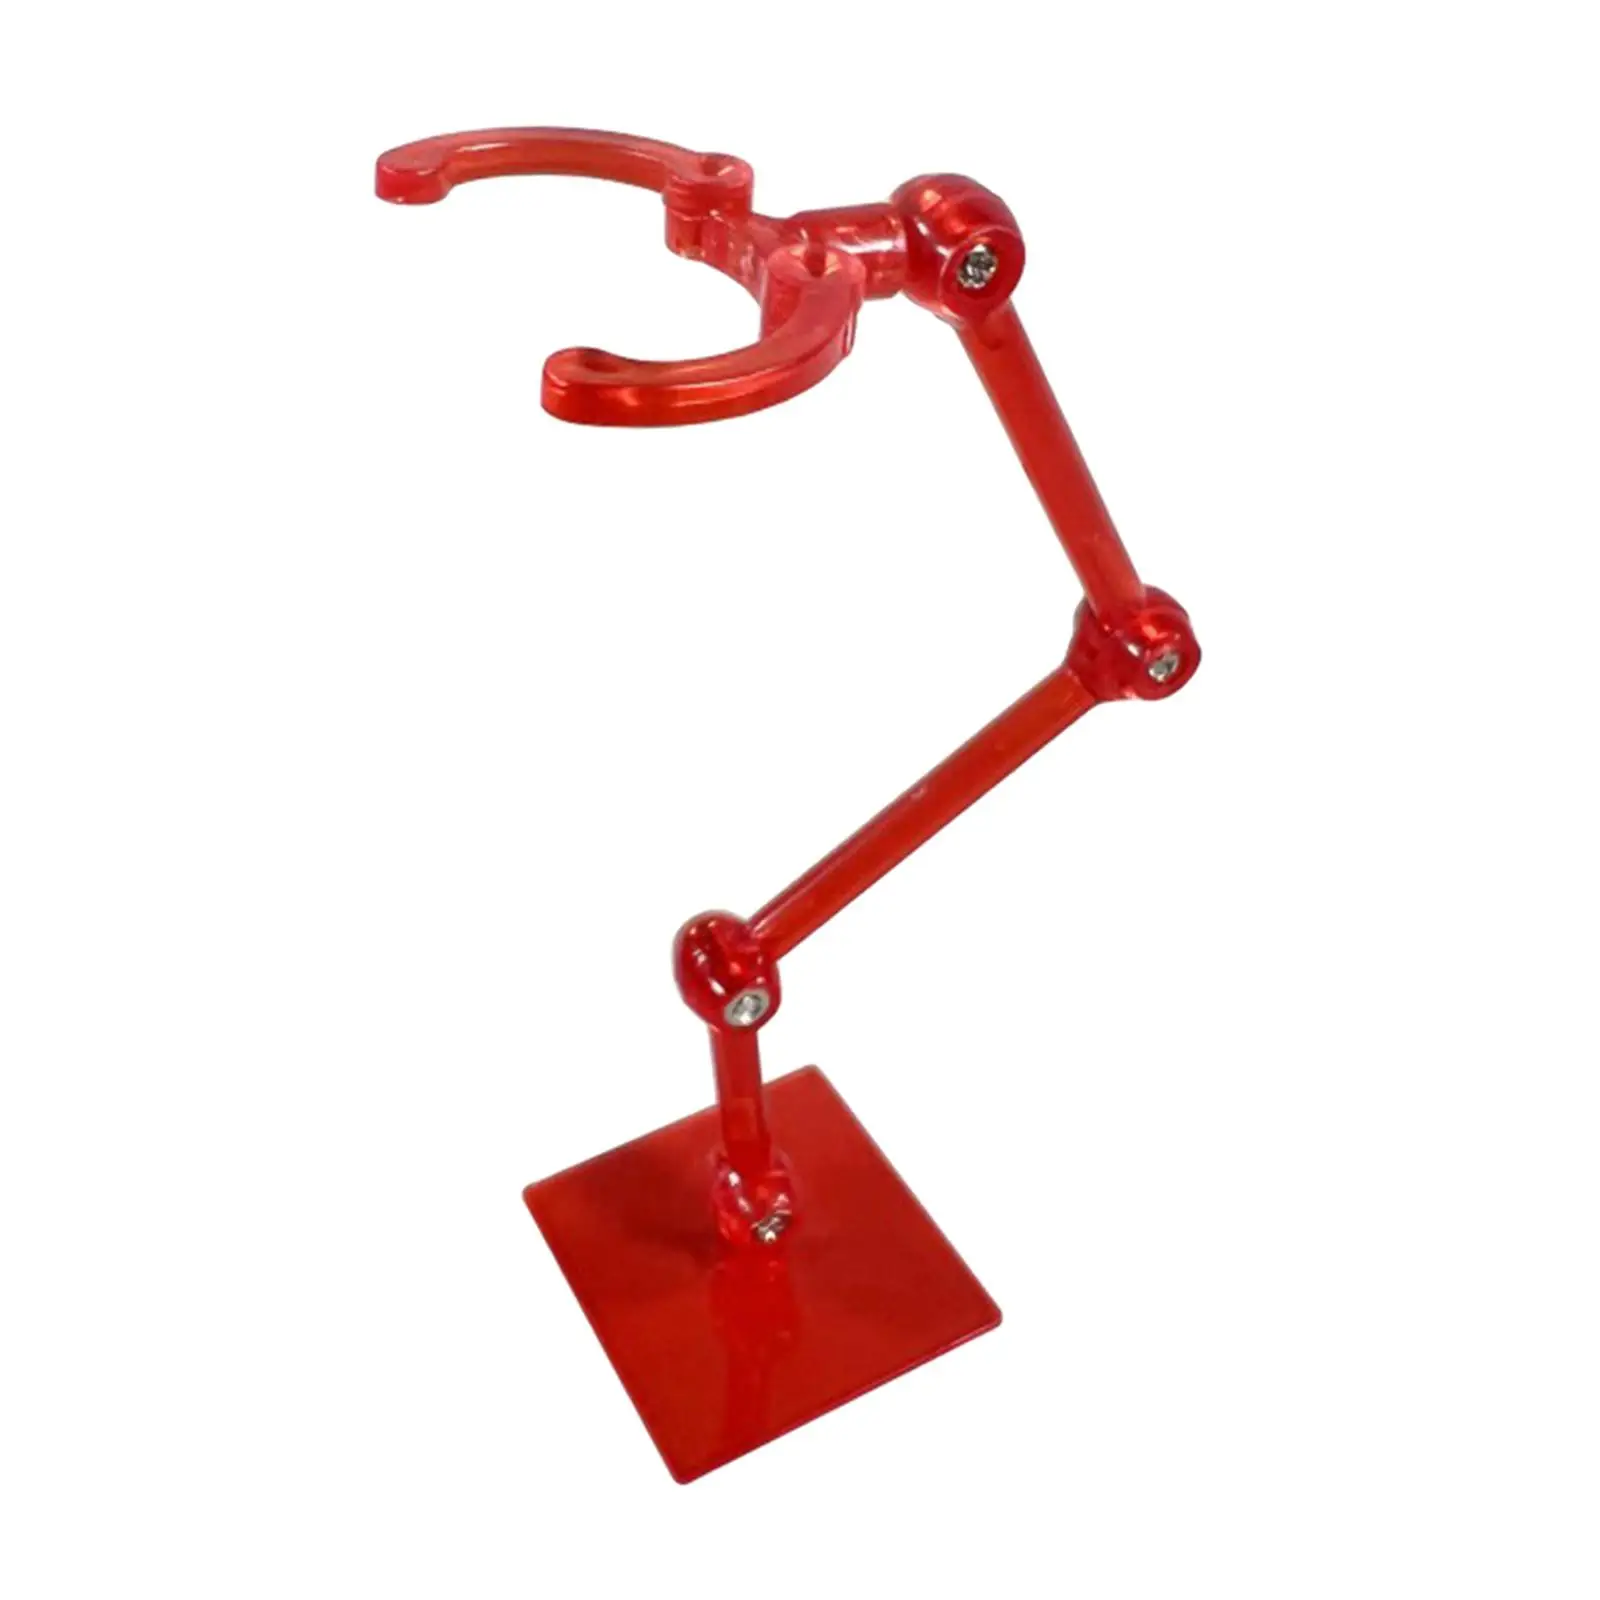  Base Adjustable Support Sturdy Flexible Rack for 6`` inch Doll